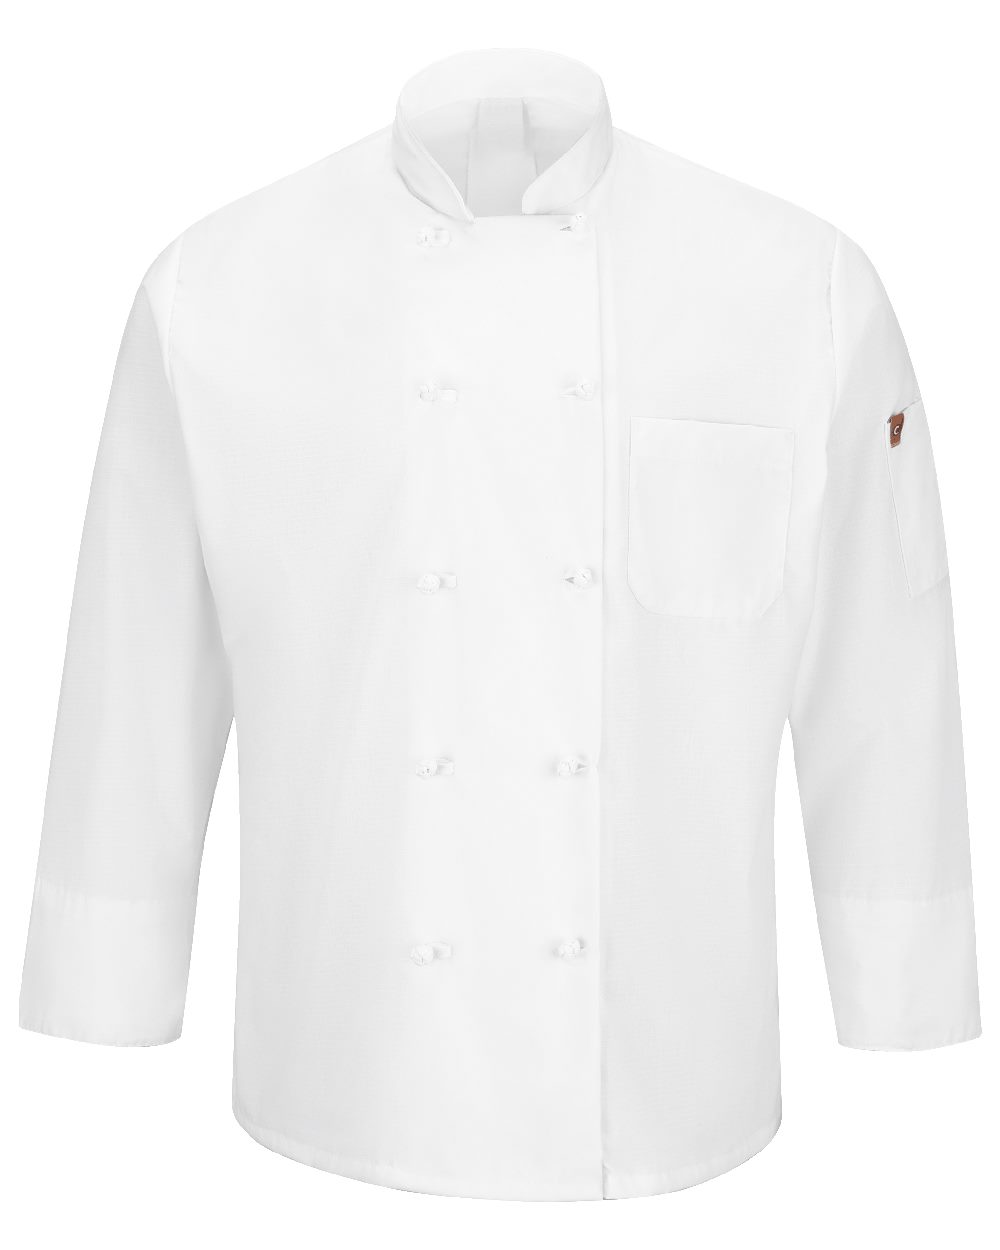 Red Kap Men's Long Sleeve Ten Button Chef Coat with Mimix and Oilblok 